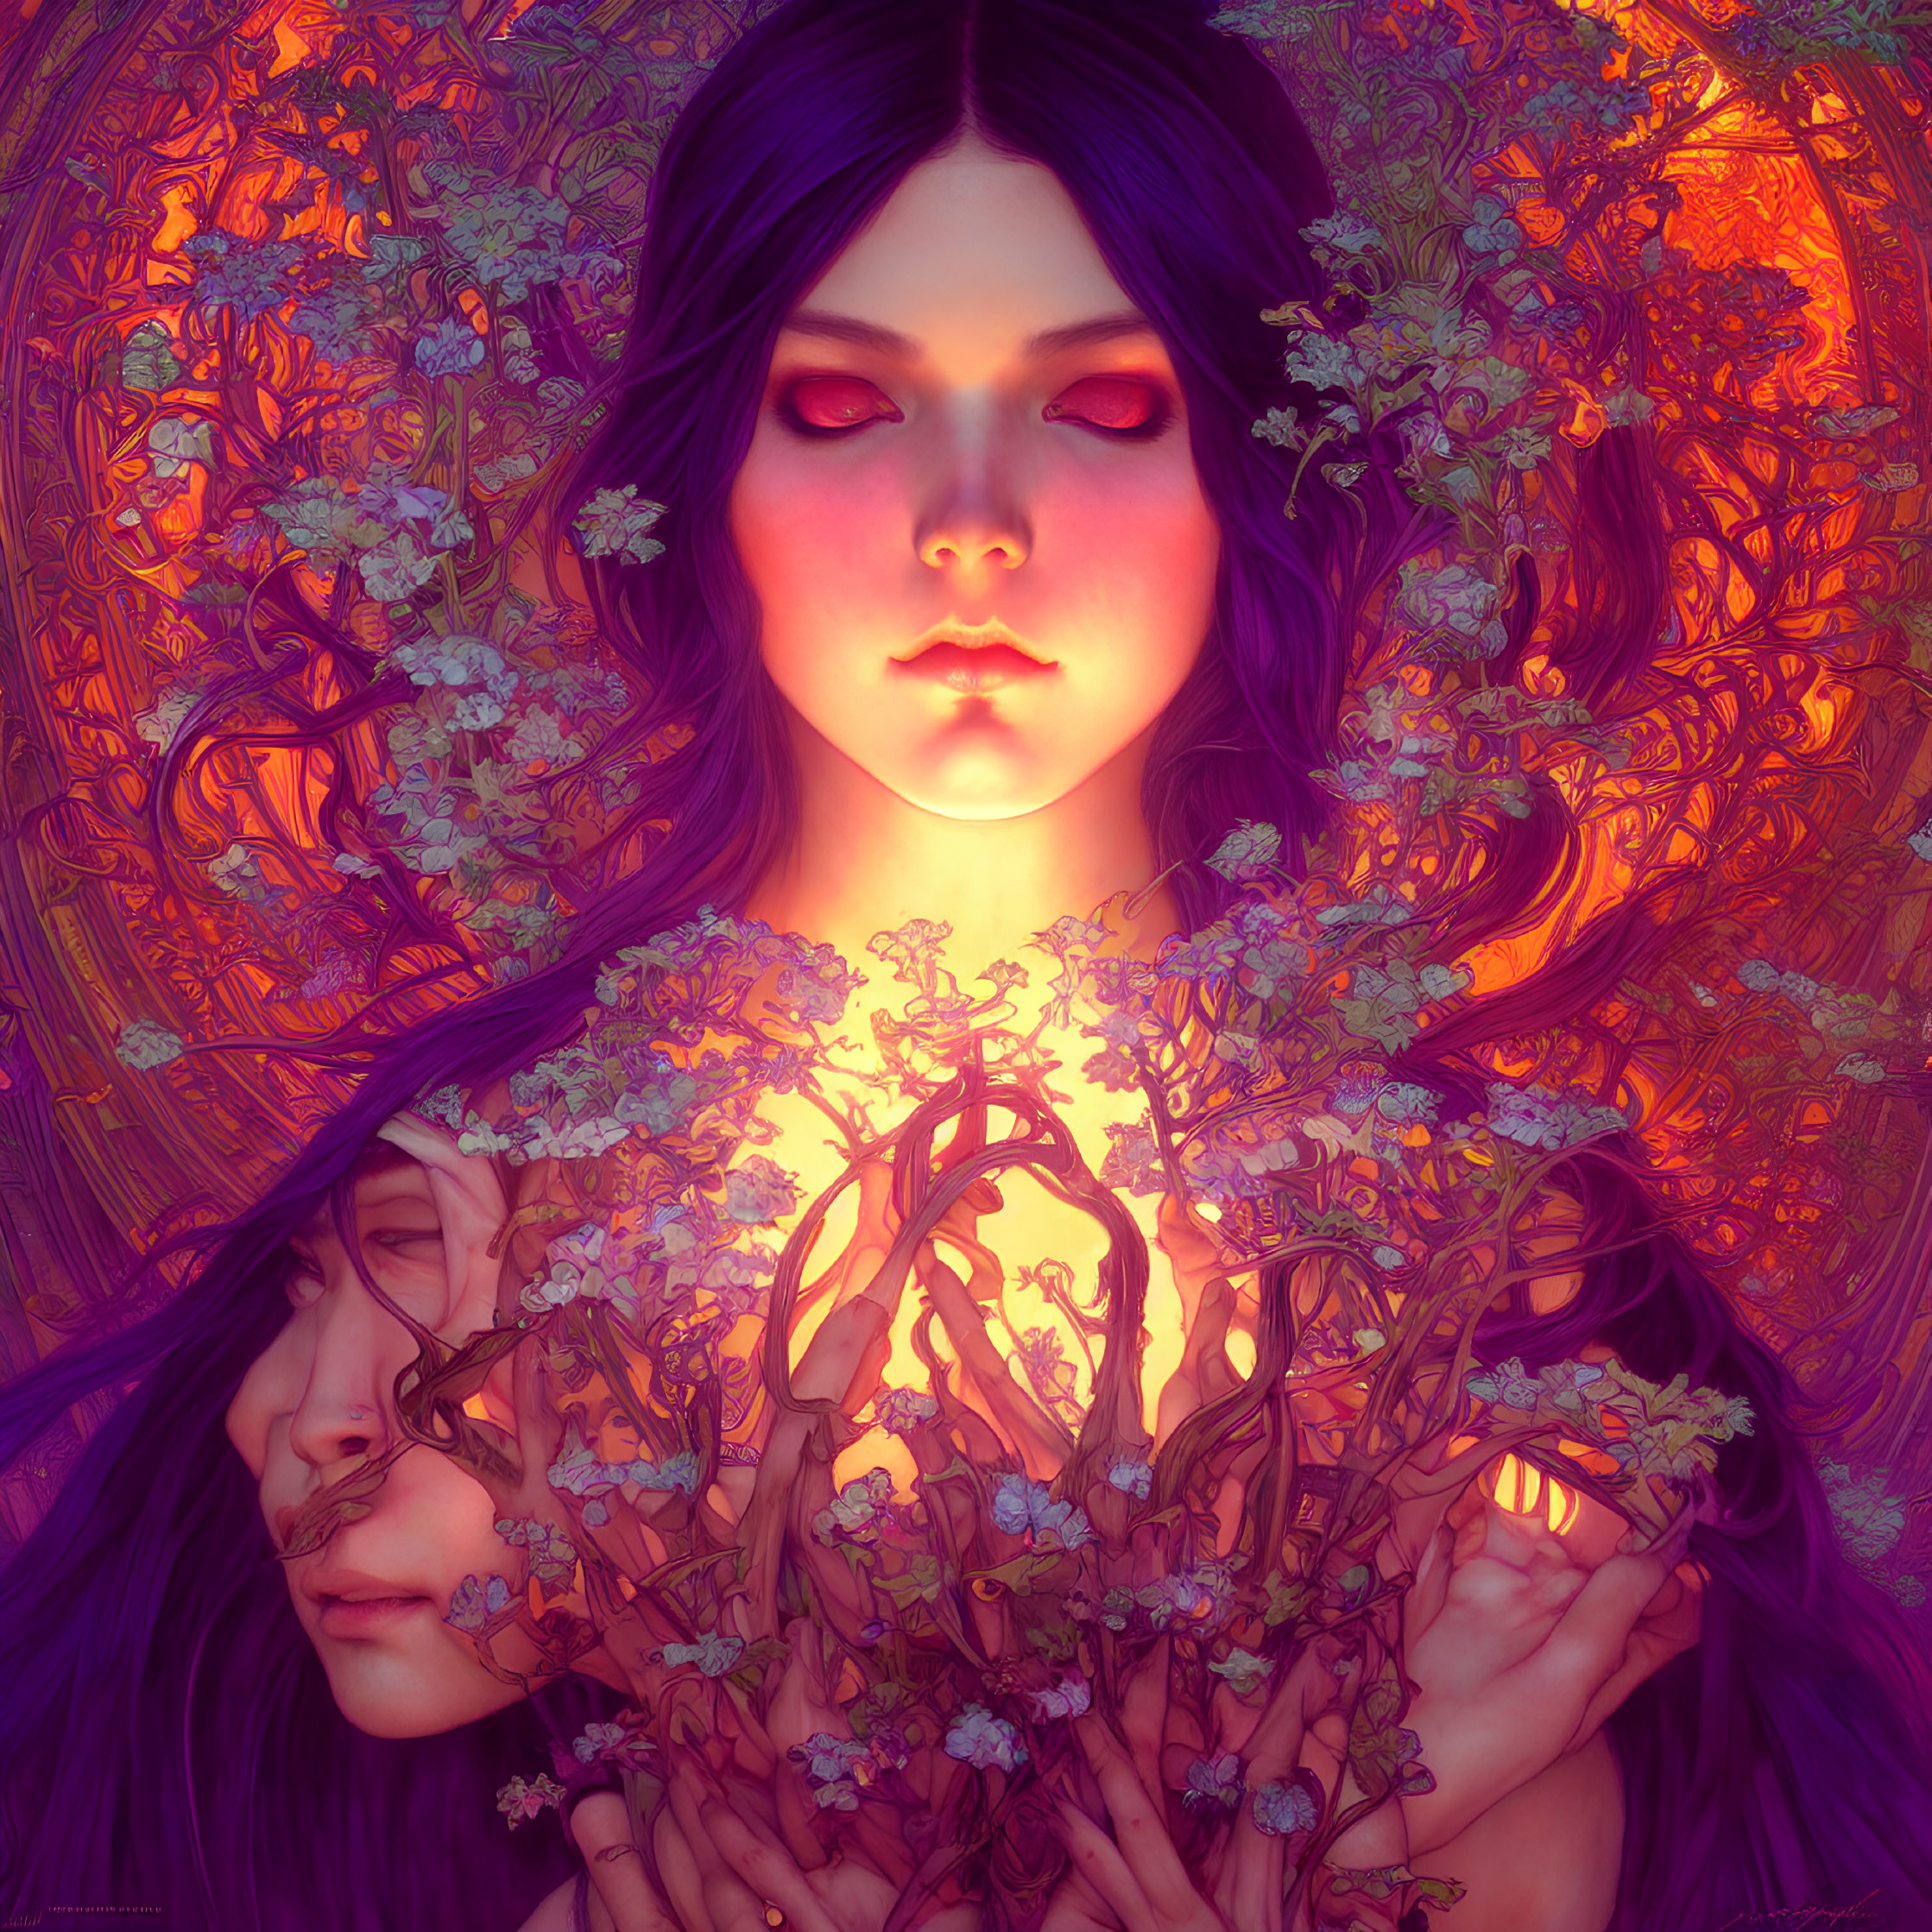 Vivid illustration of person with purple hair and glowing hands amidst intricate floral patterns